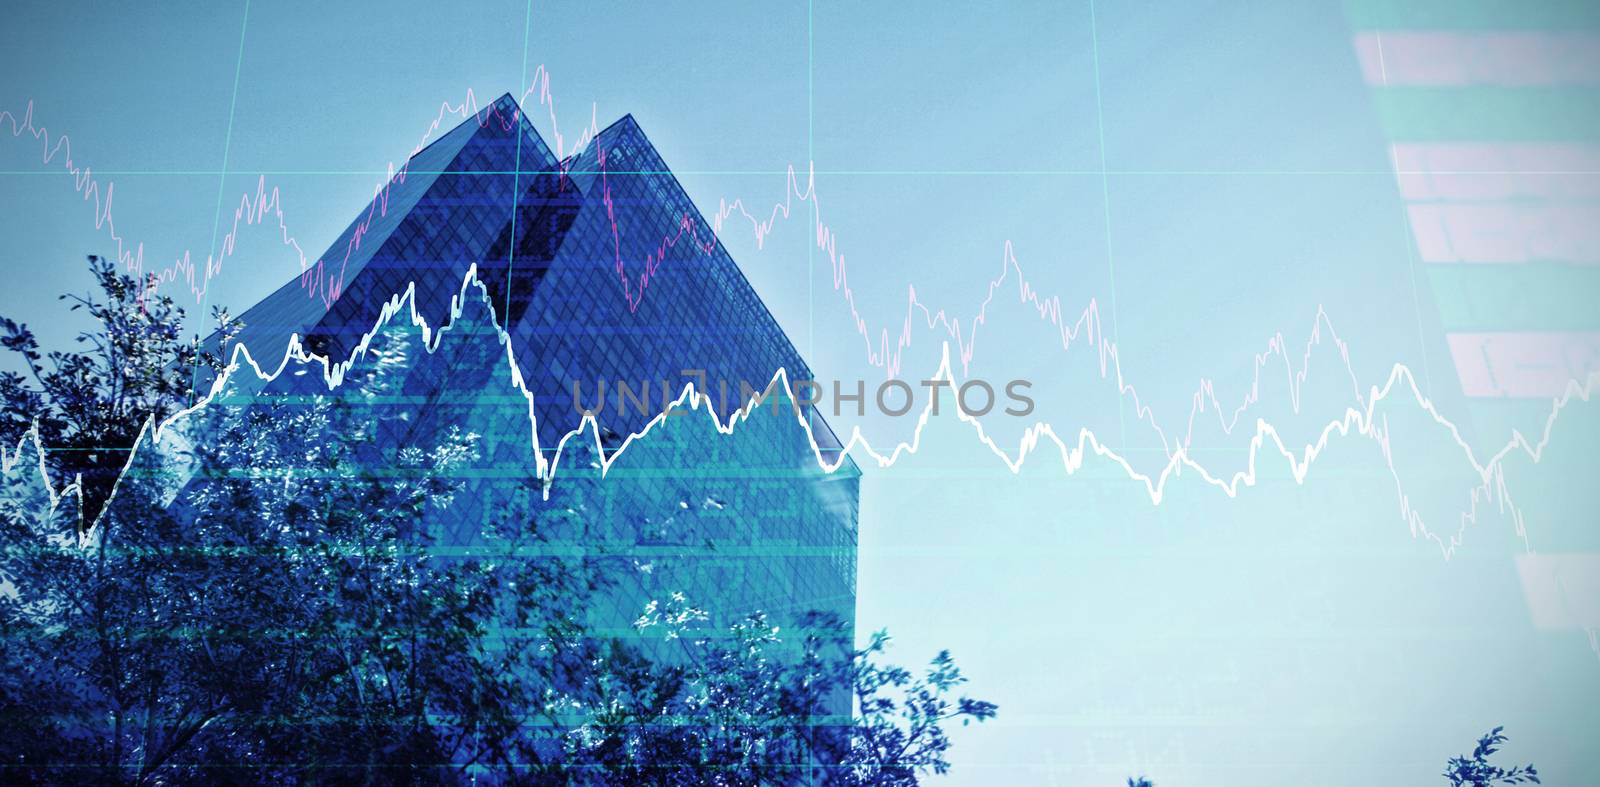 Stocks and shares against buildings against clear sky